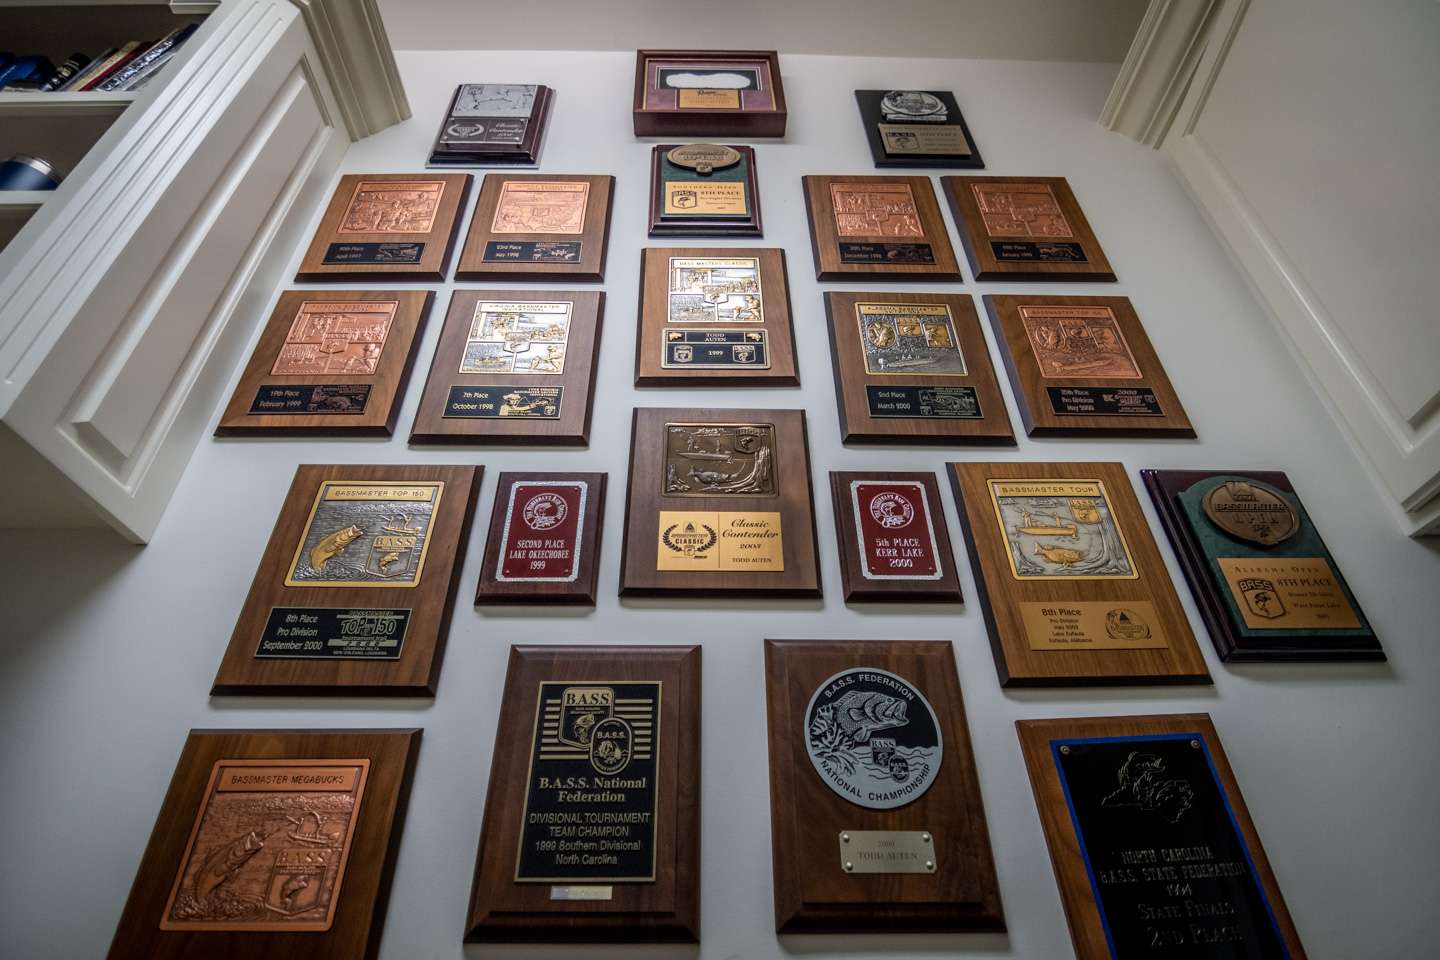 From the grassroots B.A.S.S. Nation, to the Bassmaster Invitationals, to the Classic, this wall of honor is filled with plaques from Auten’s early years of tournament angling. 